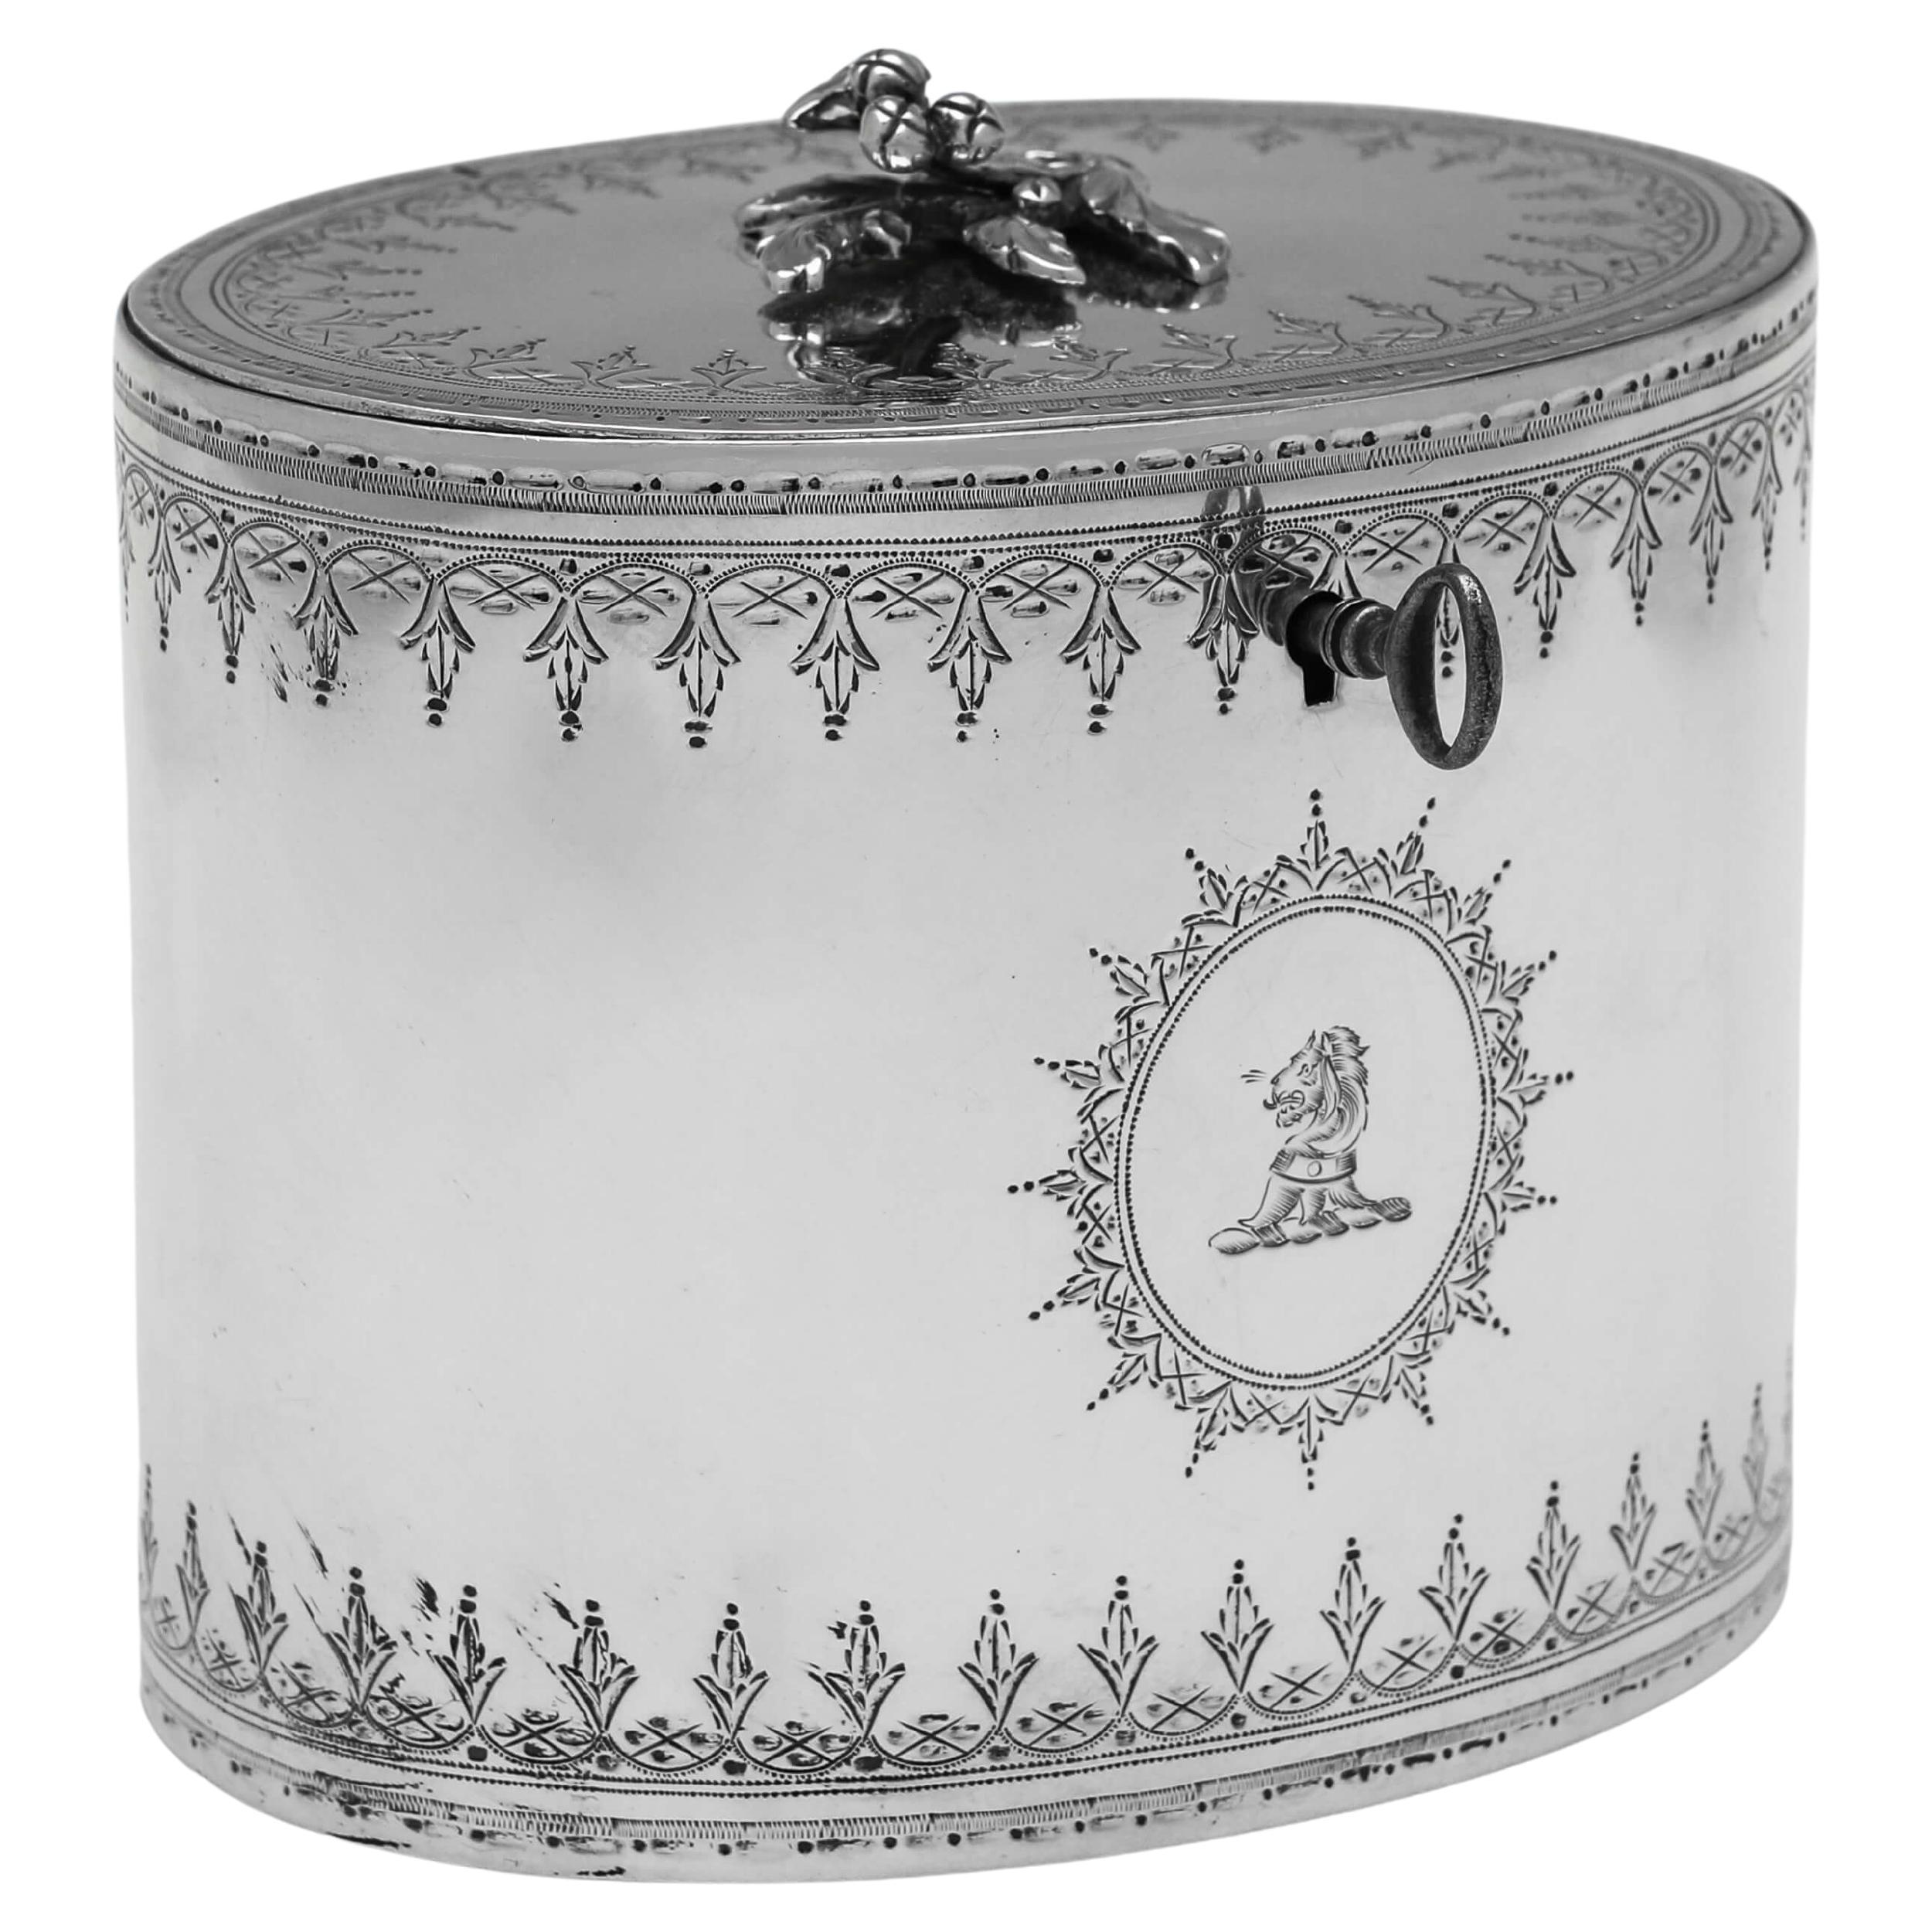 Stunning Engraved Neoclassical Antique Sterling Silver Tea Caddy - London 1806 For Sale